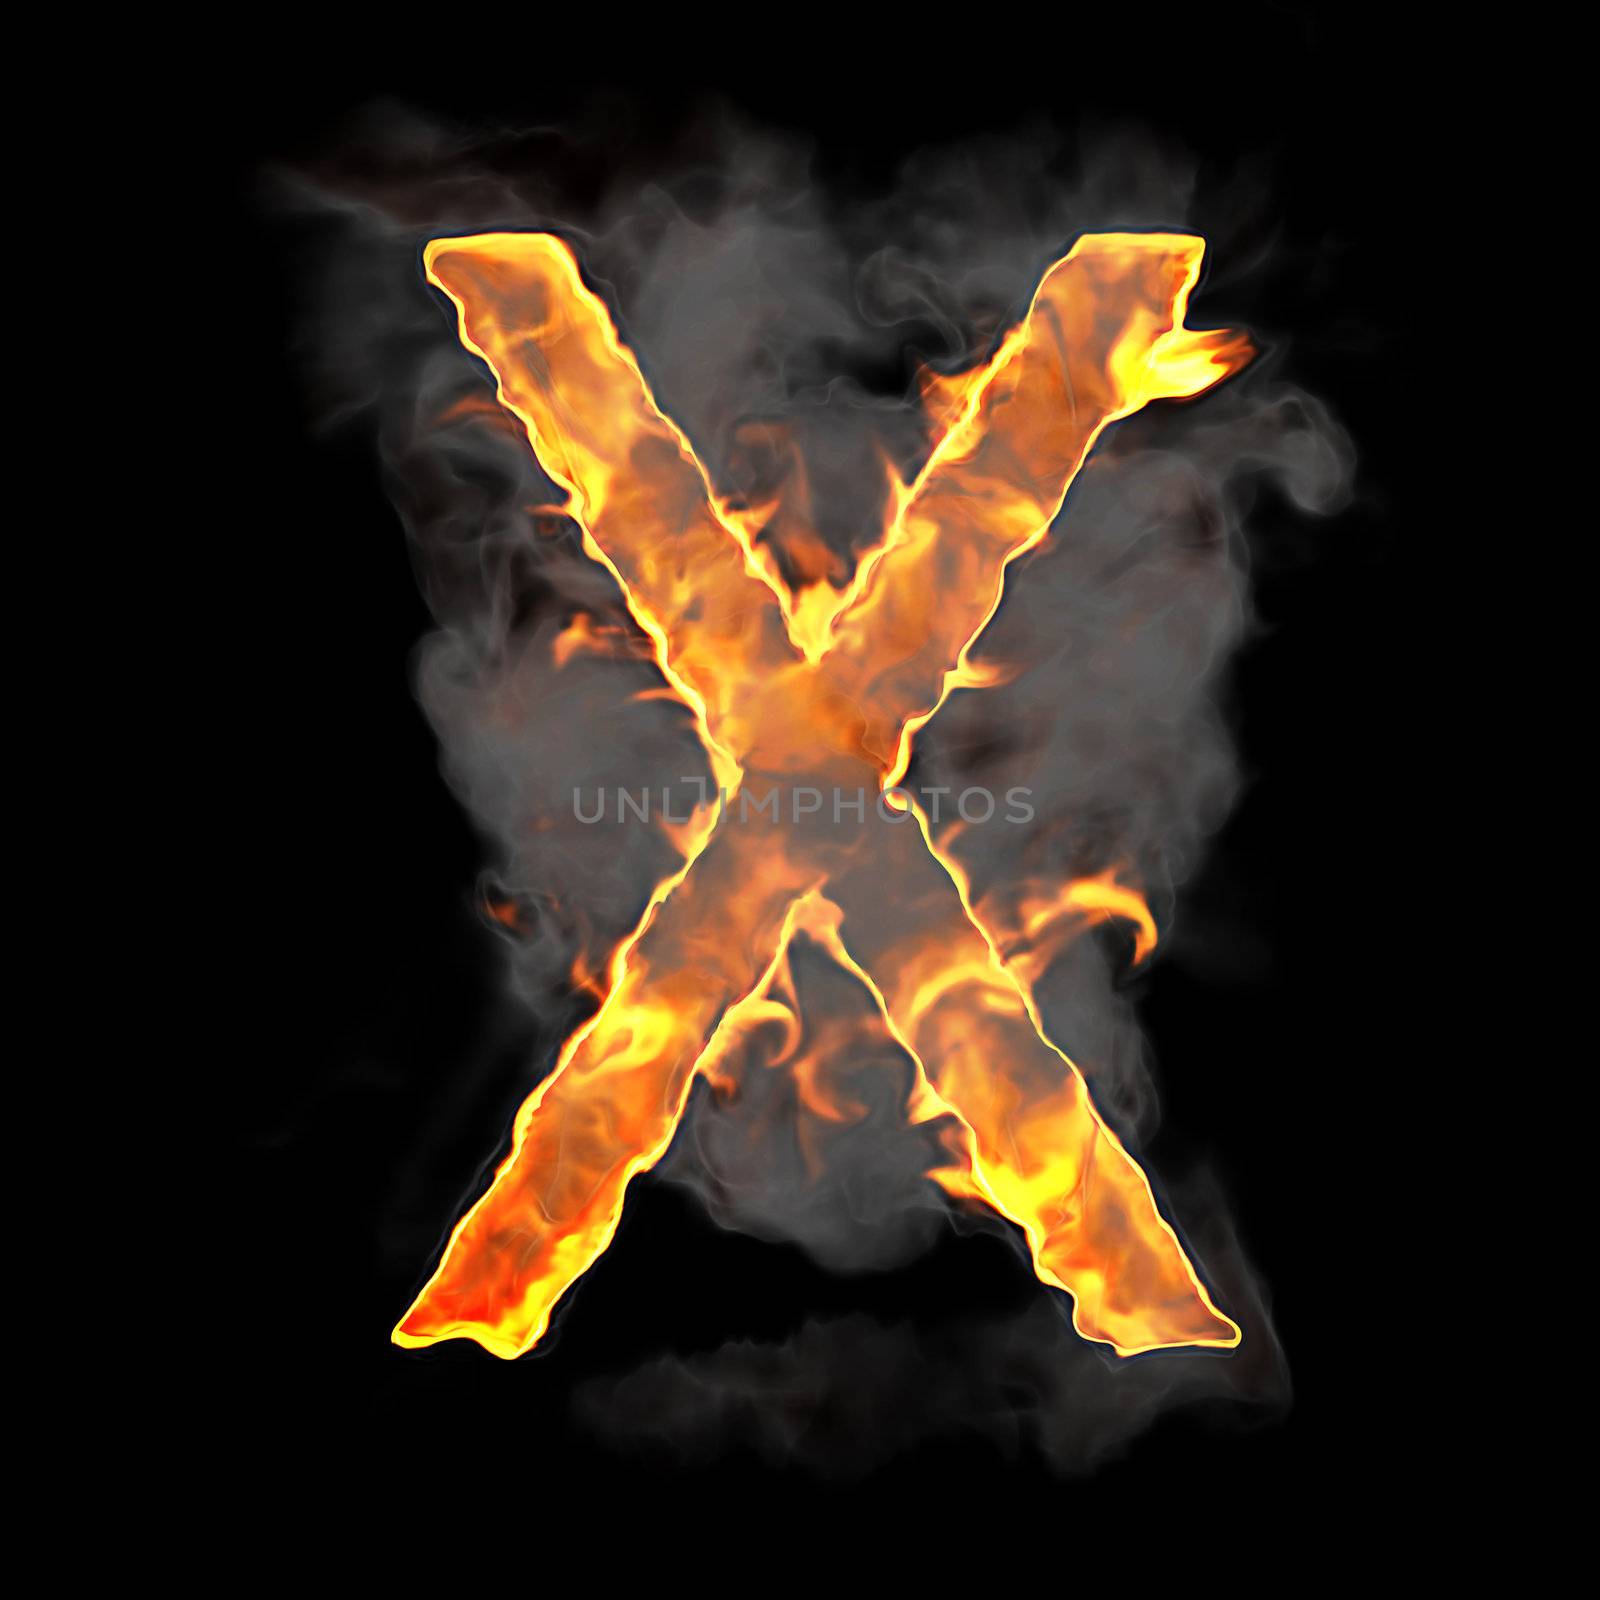 Burning and flame font X letter over black background